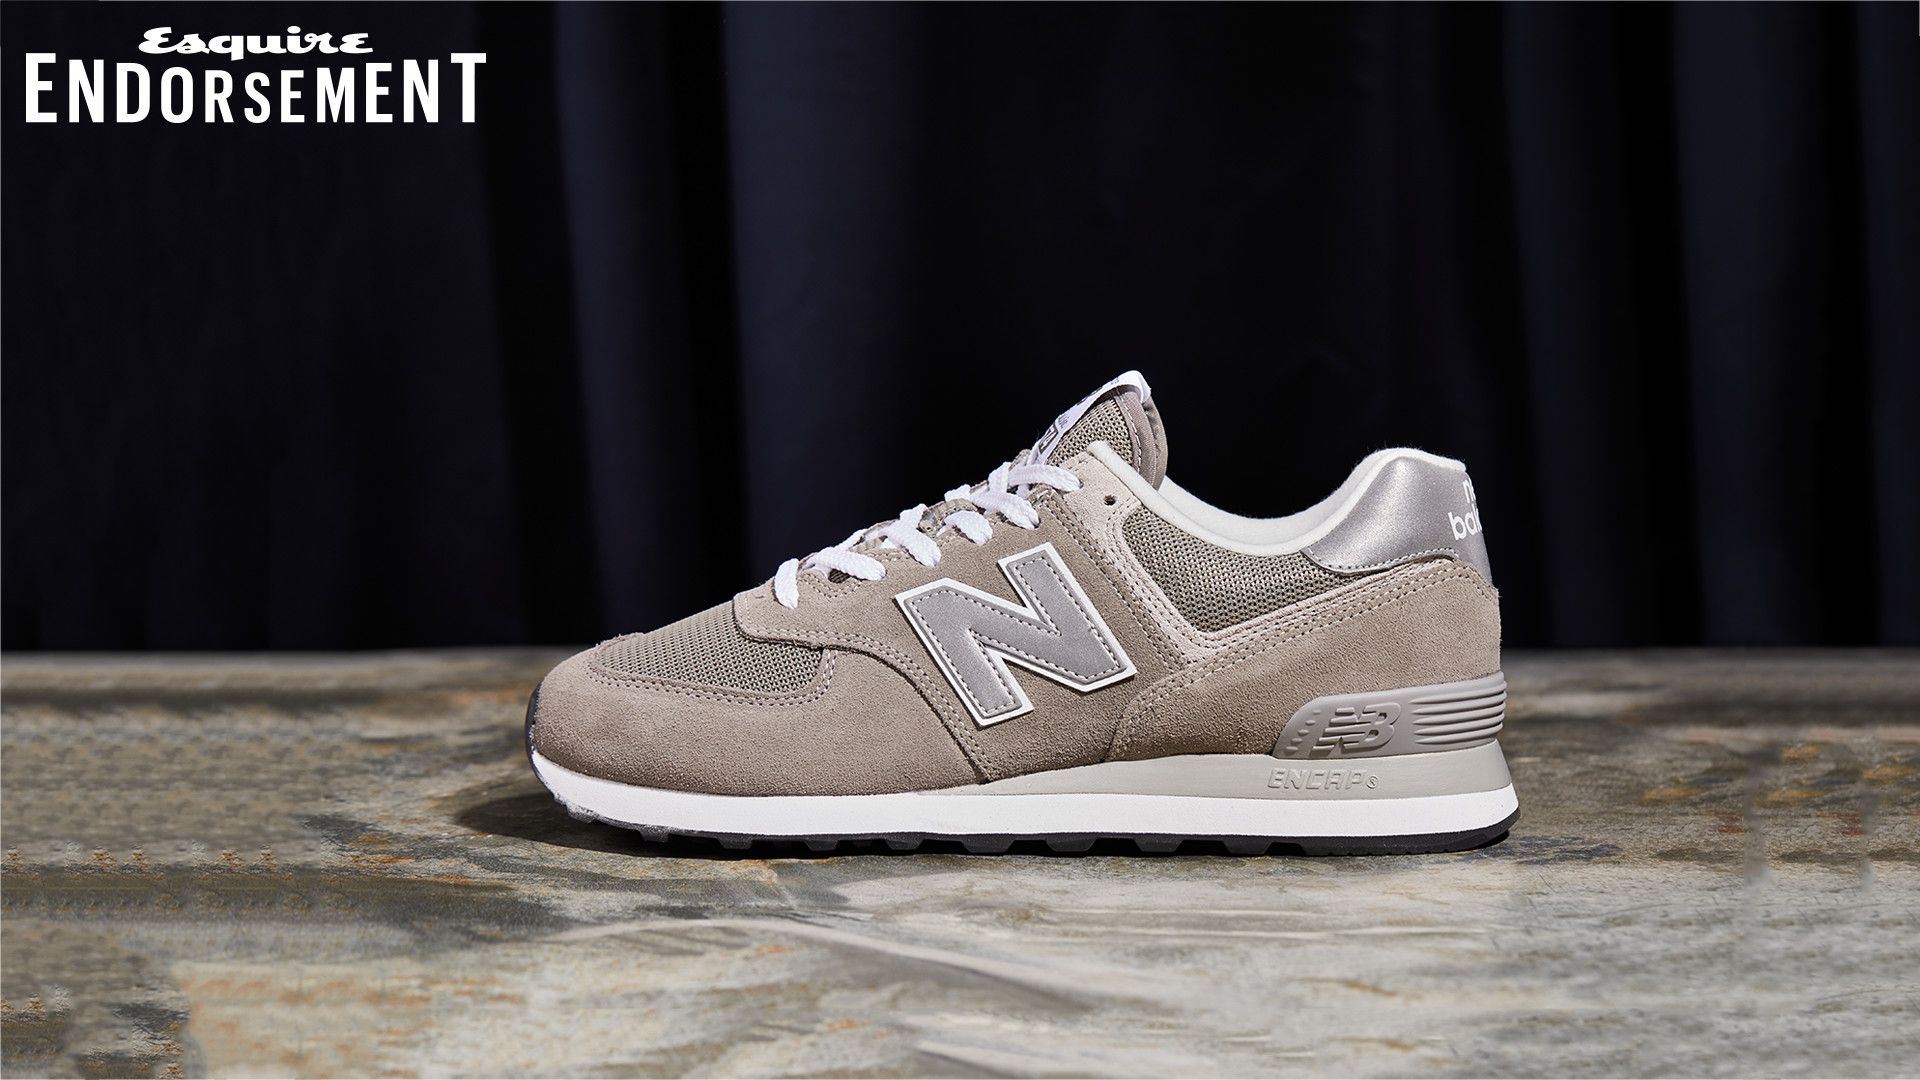 New Balance Sneakers - The Sneaker That's Anti-Fashion It's Fashionable